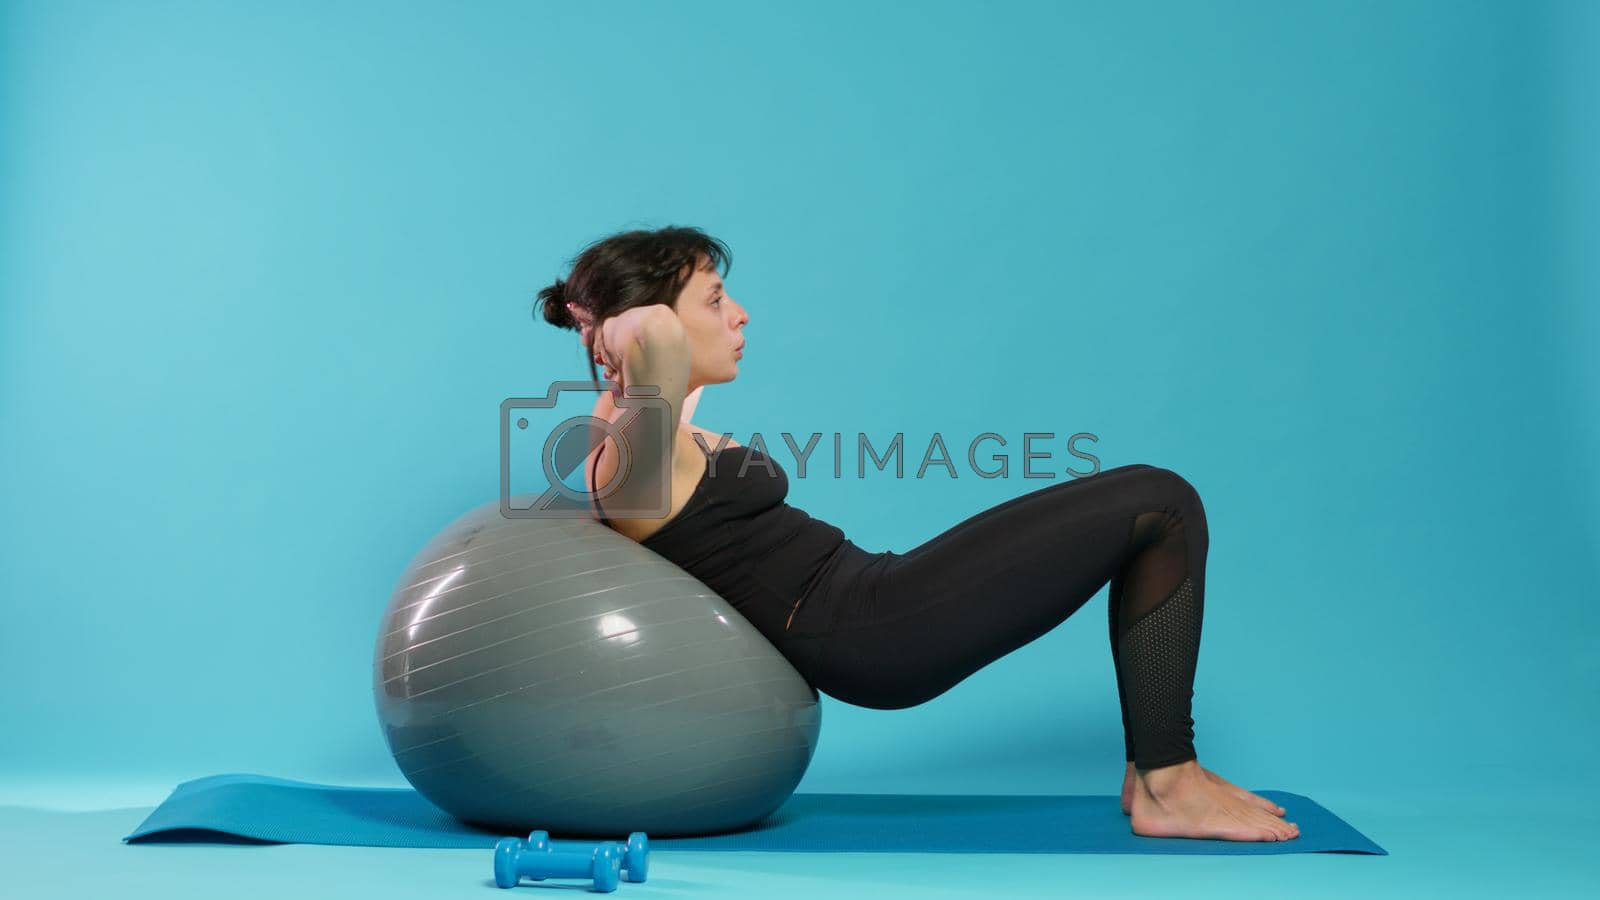 Athletic person doing physical effort on fitness toning ball, training body muscles. Fit woman using sport equipment to do gymnastics exercise and endurance activity over background.